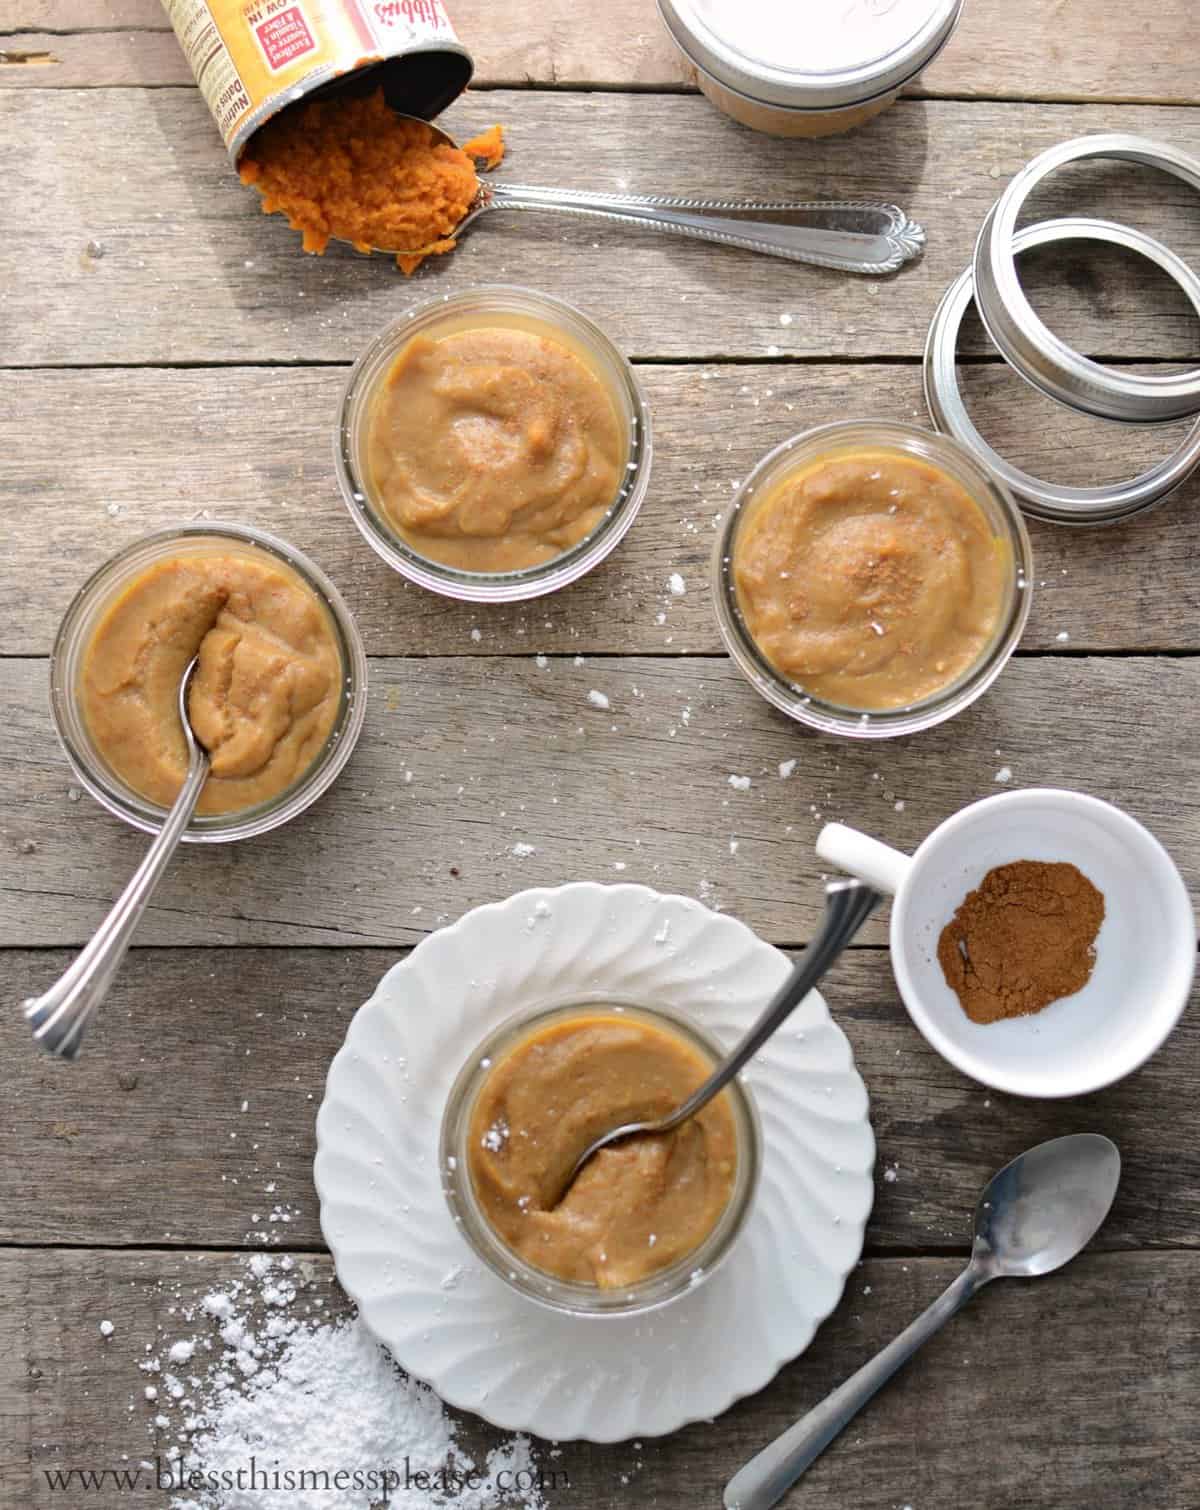 pumpkin pudding in small glass jars on wooden table.